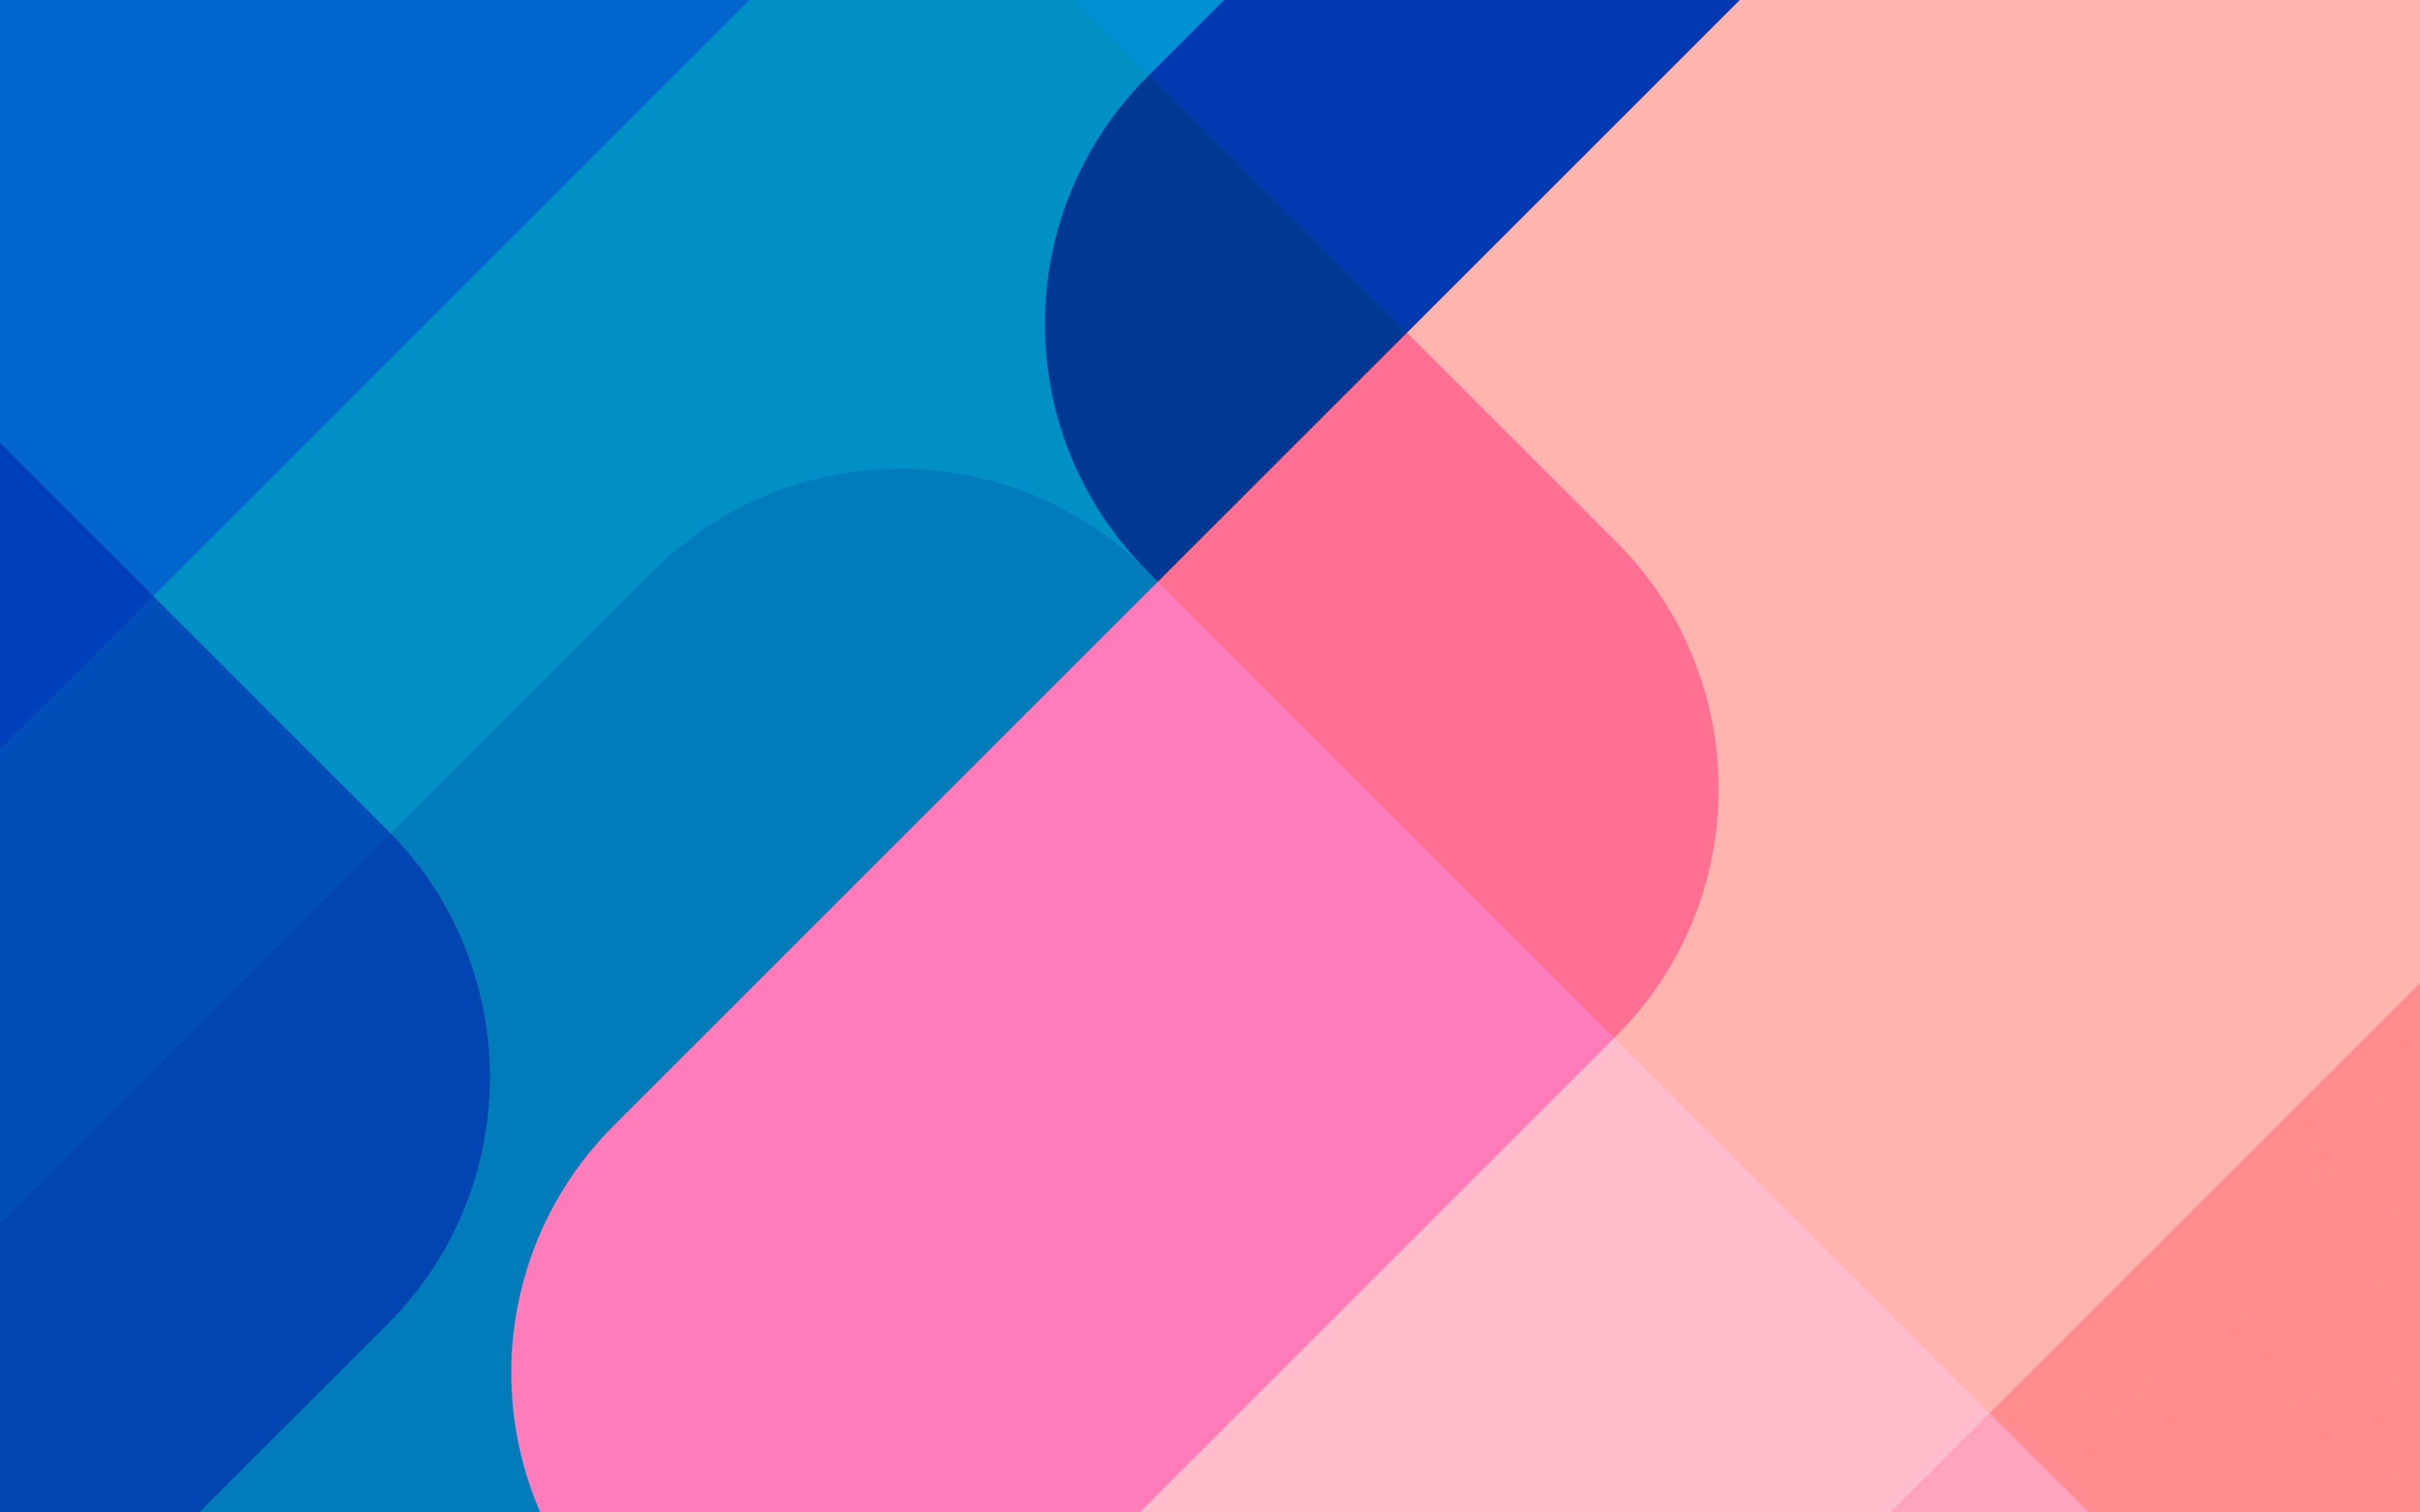 Download wallpaper 4k, material design, pink and blue, abstract